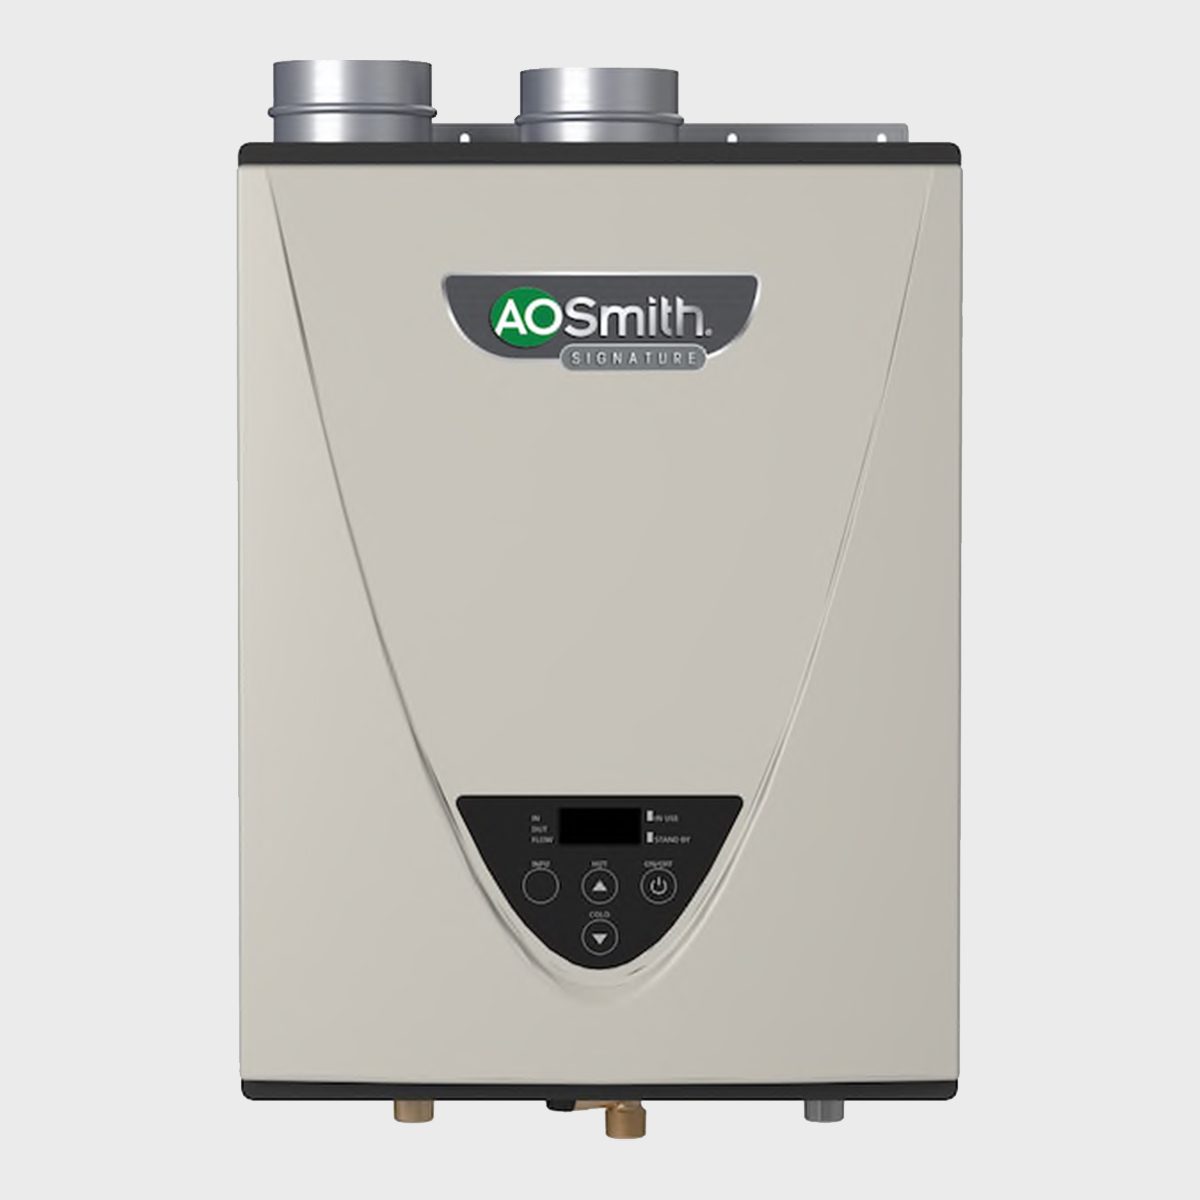 A.o. Smith Signature Series Tankless Water Heater